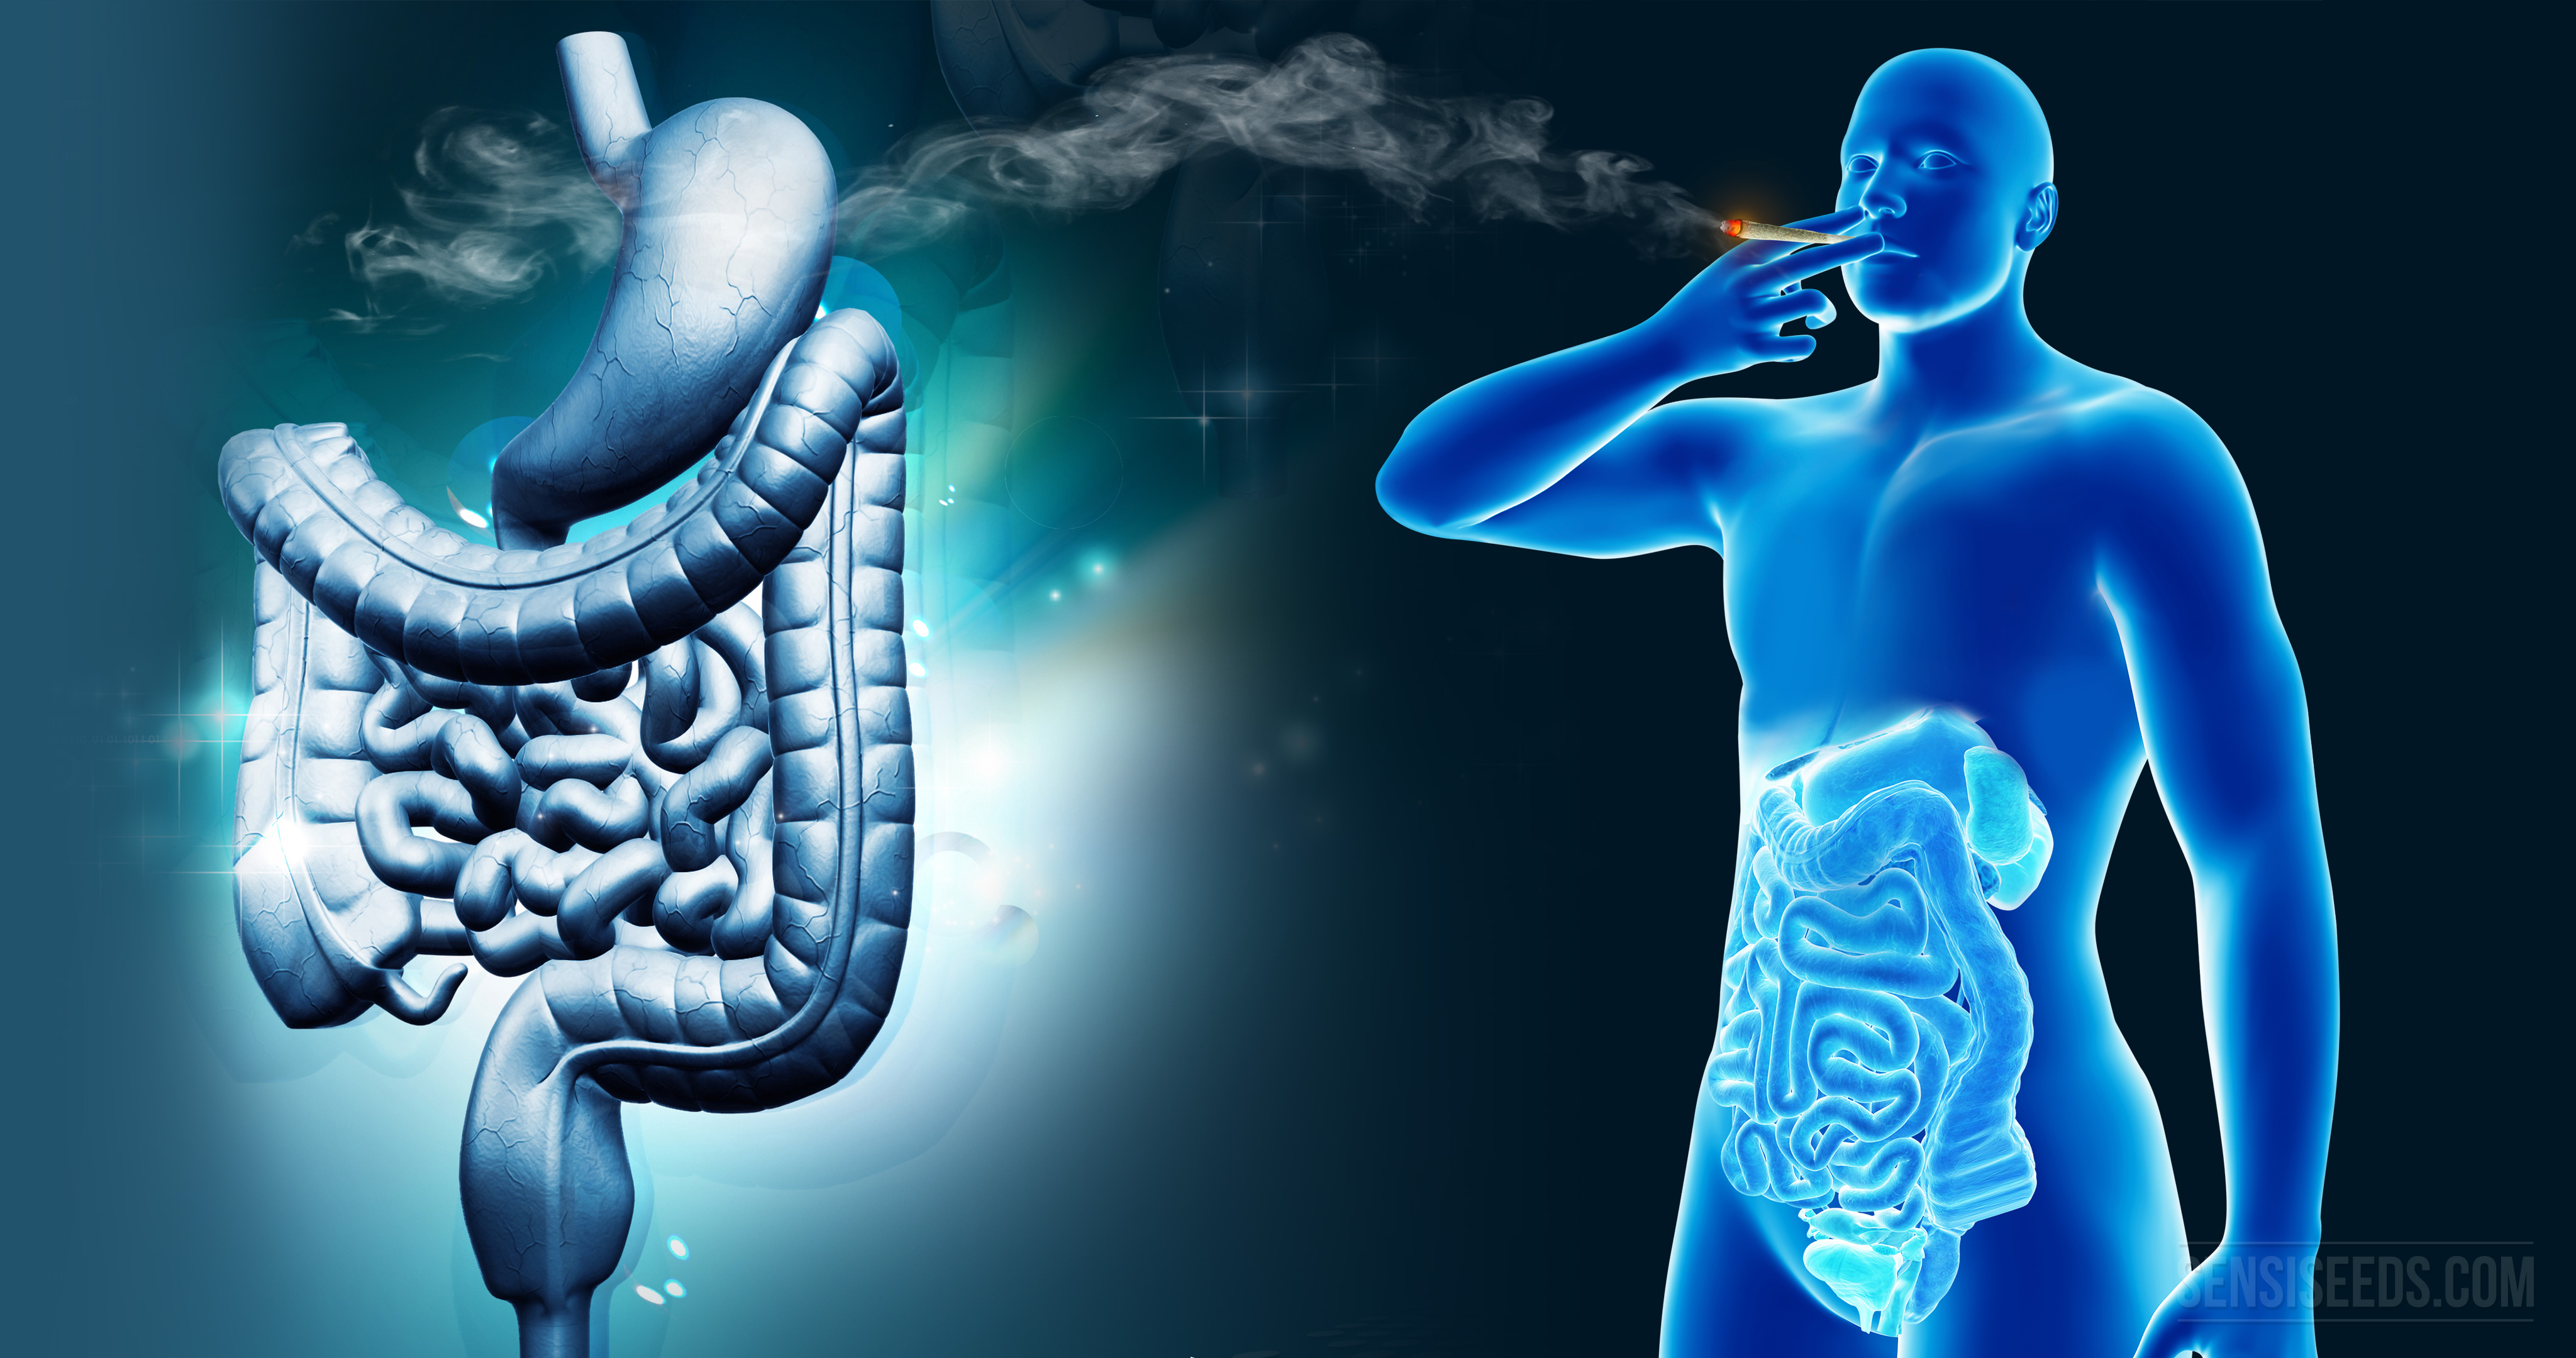 Cannabis can affect the digestive system in both ways